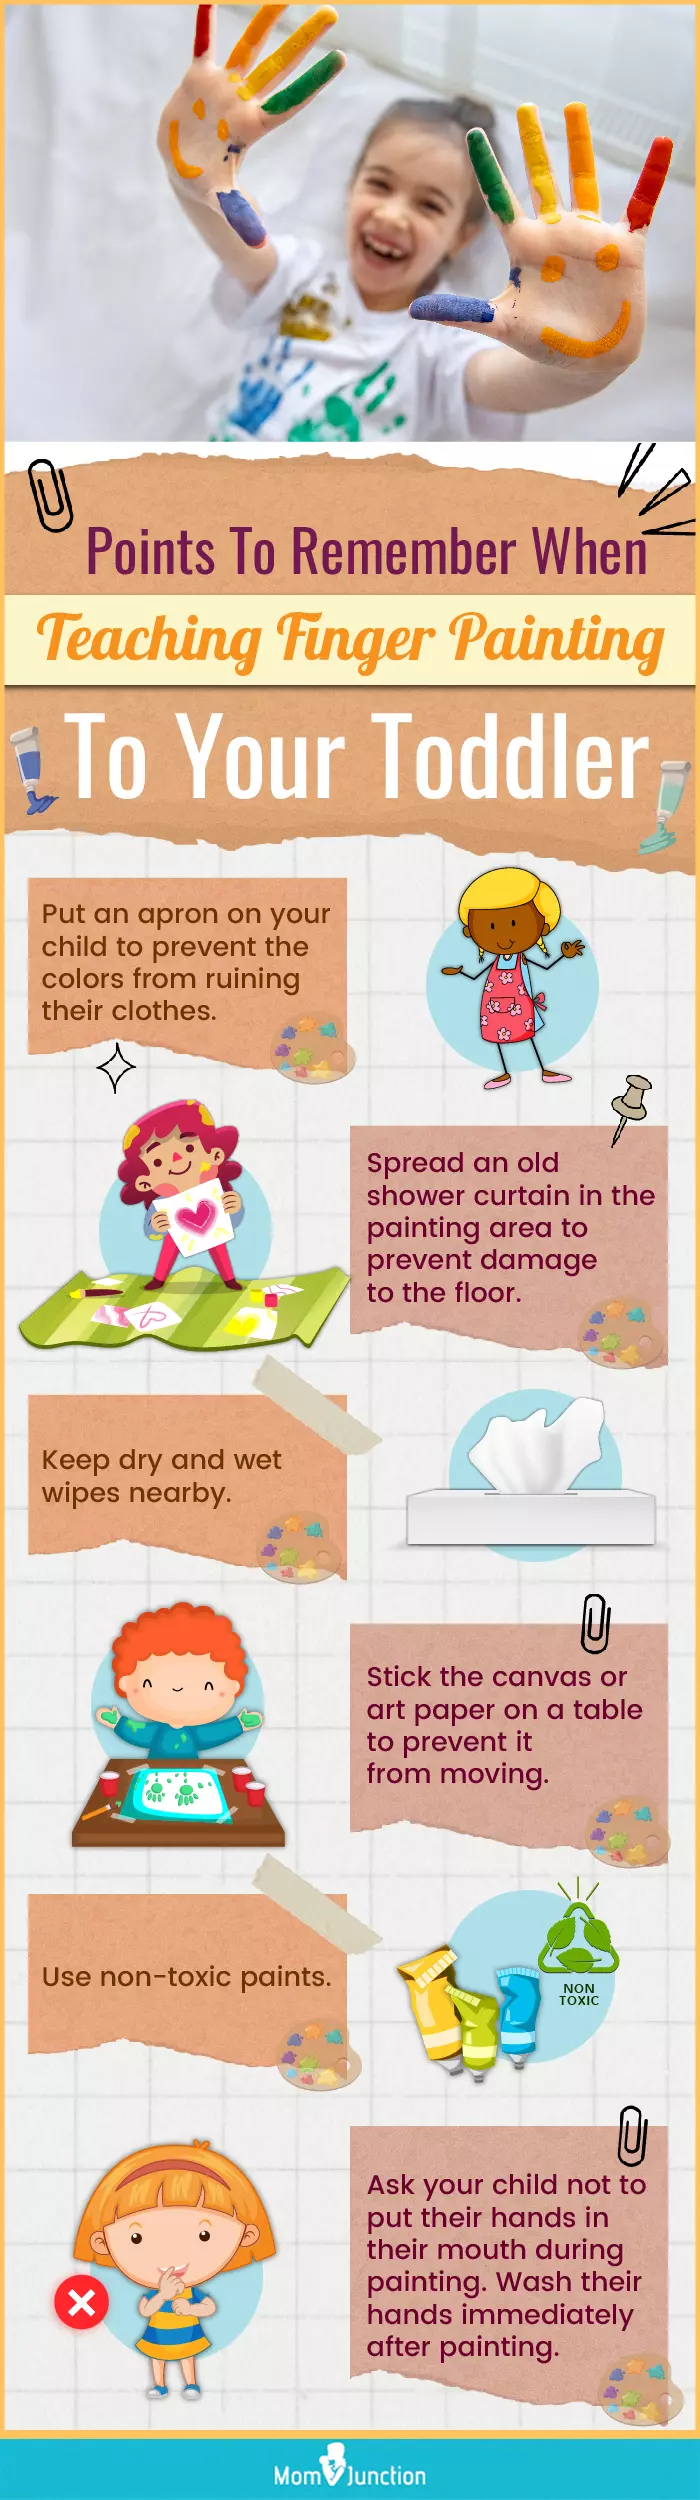 points to remember when teaching finger painting to your toddler (infographic)